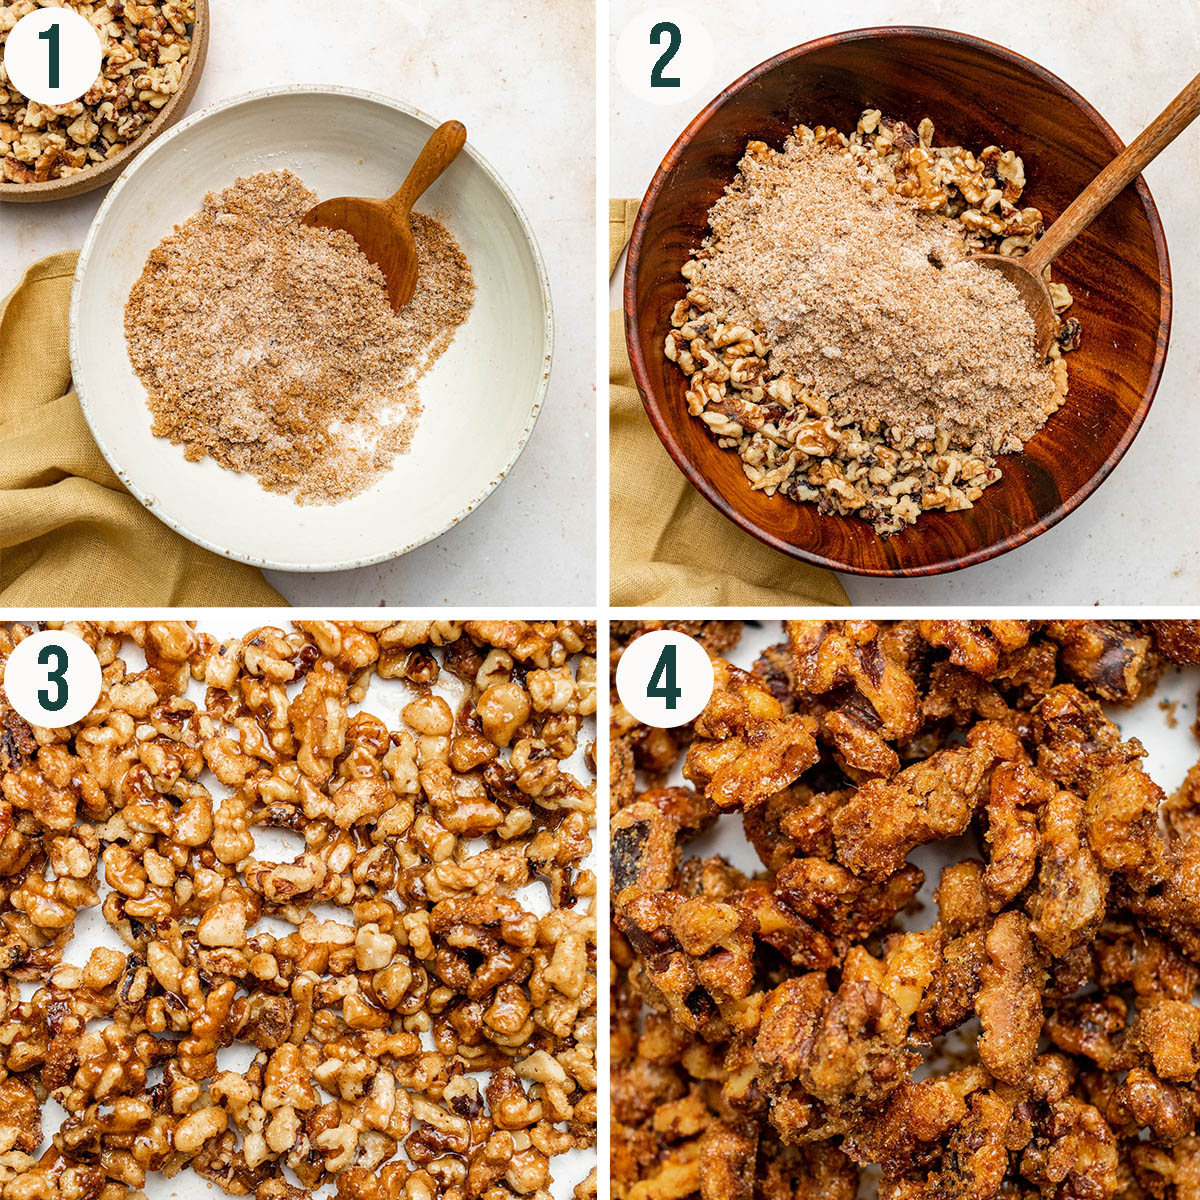 Candied walnuts steps 1 to 4, coating the nuts in a sugar mixture and baking.